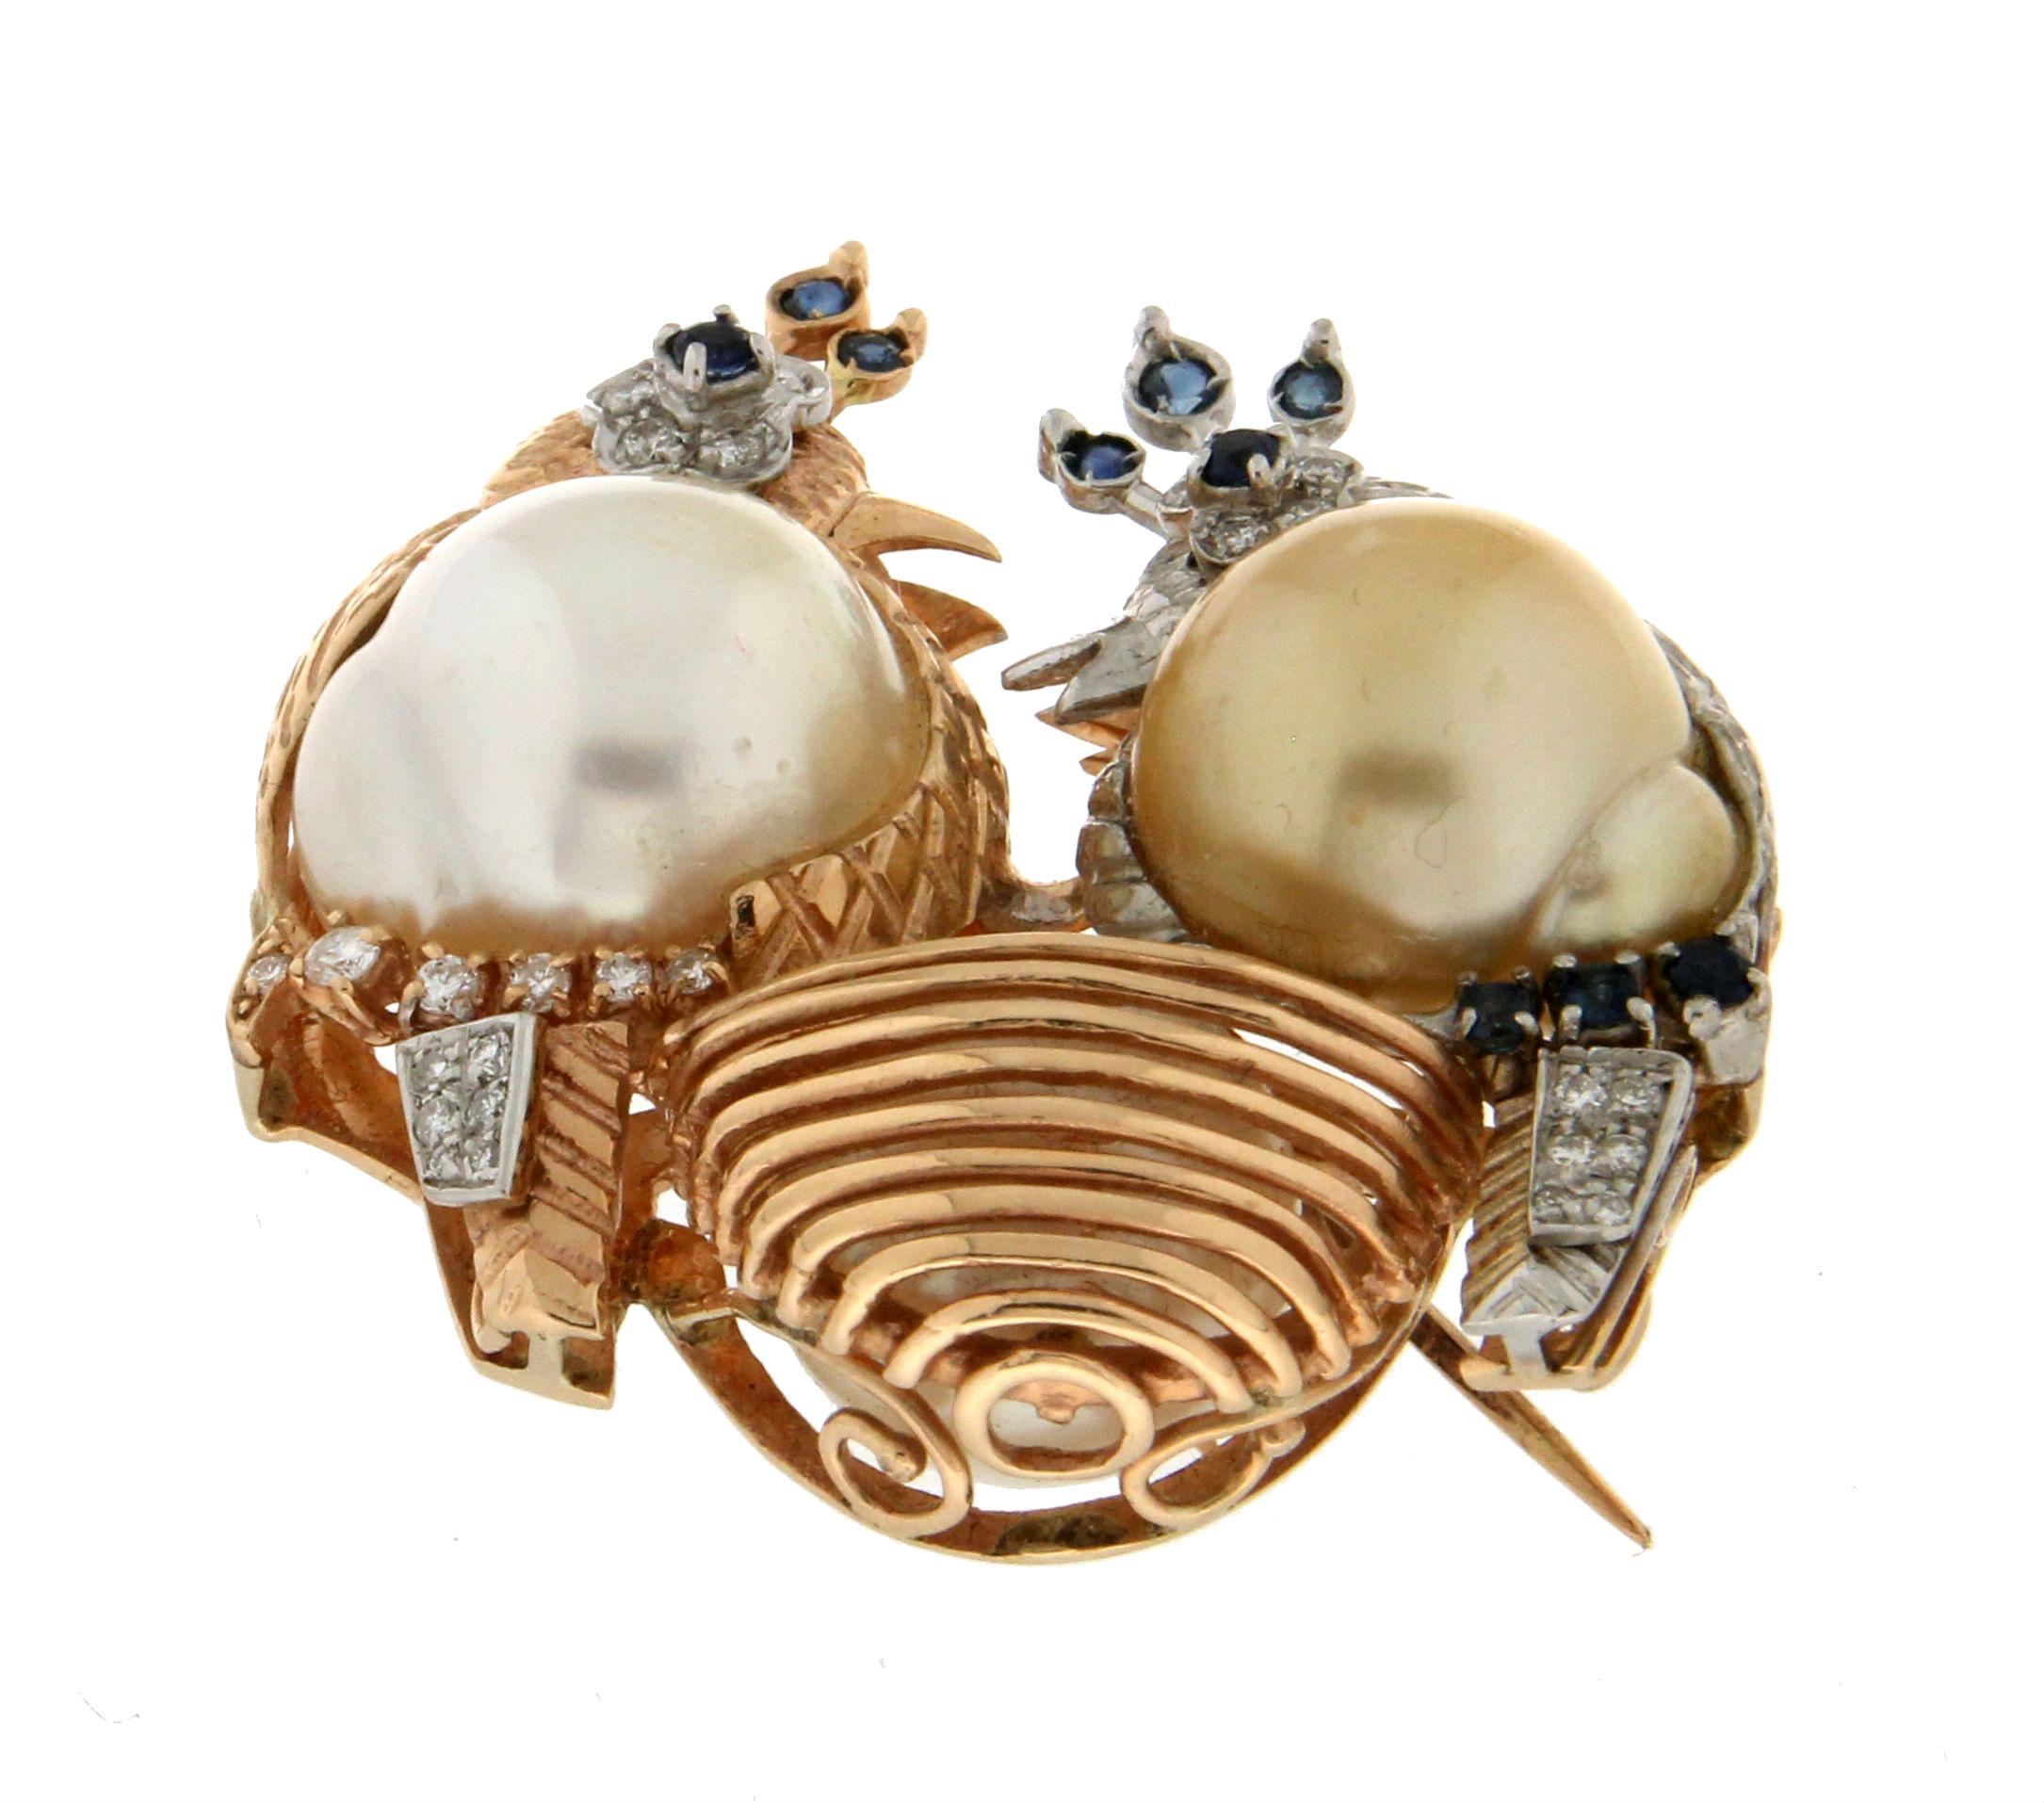 Handcraft Birds 14 Karat White And Yellow Gold Australian Baroque Pearls Diamonds Sapphires Brooch
Made entirely by hand by our craftsmen.

Brooch total weight 24.40 grams
Pearls weight 54 karat
Pearls size 15 mm
Diamonds weight 0.29 karat
